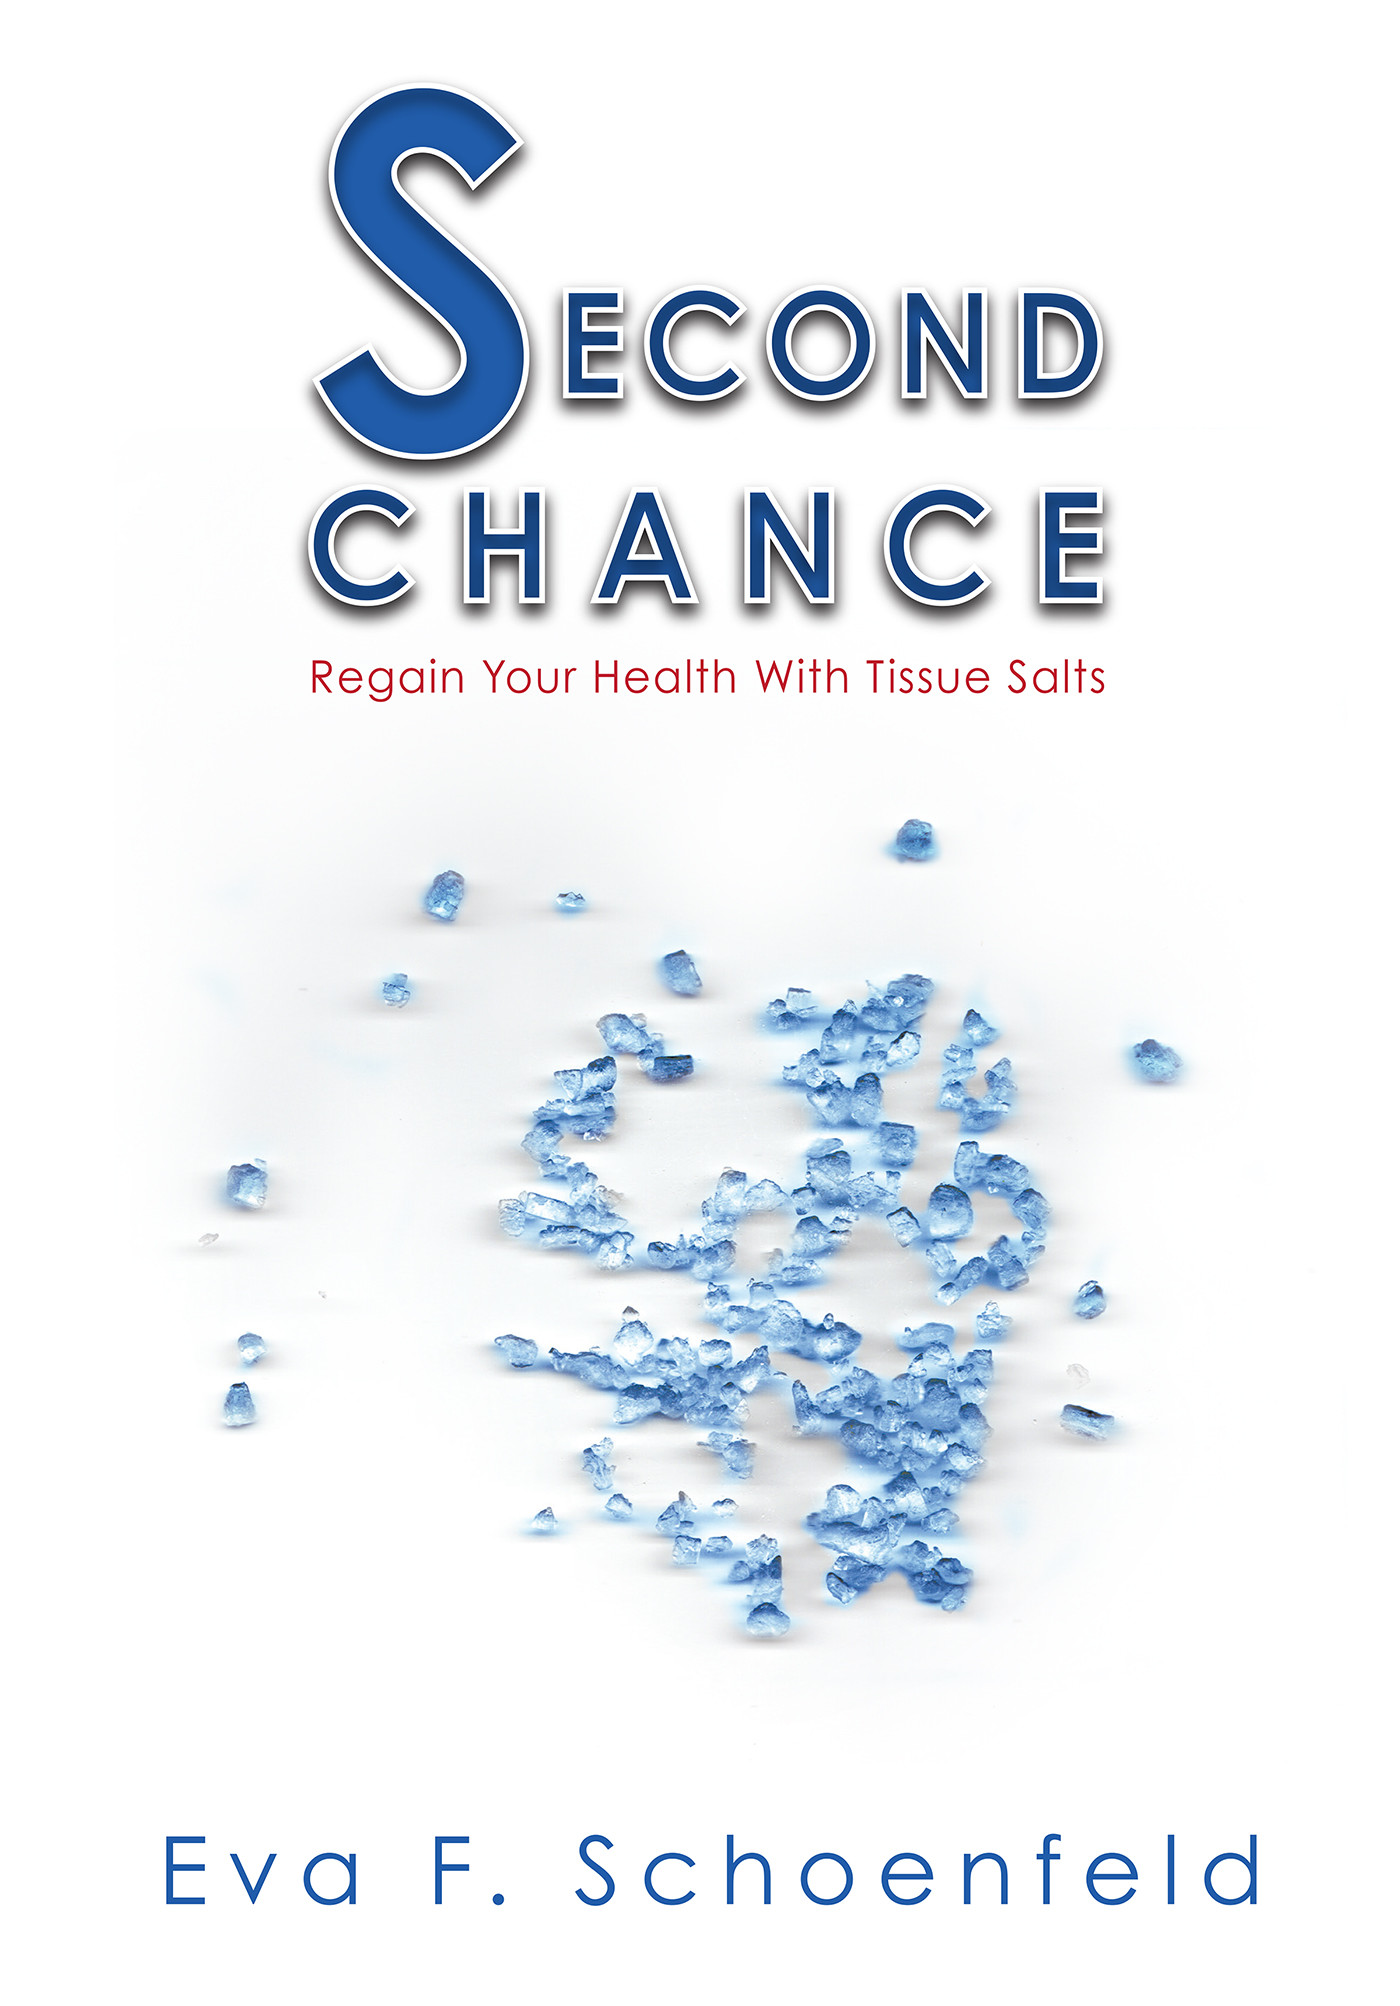 Cover Second Chance